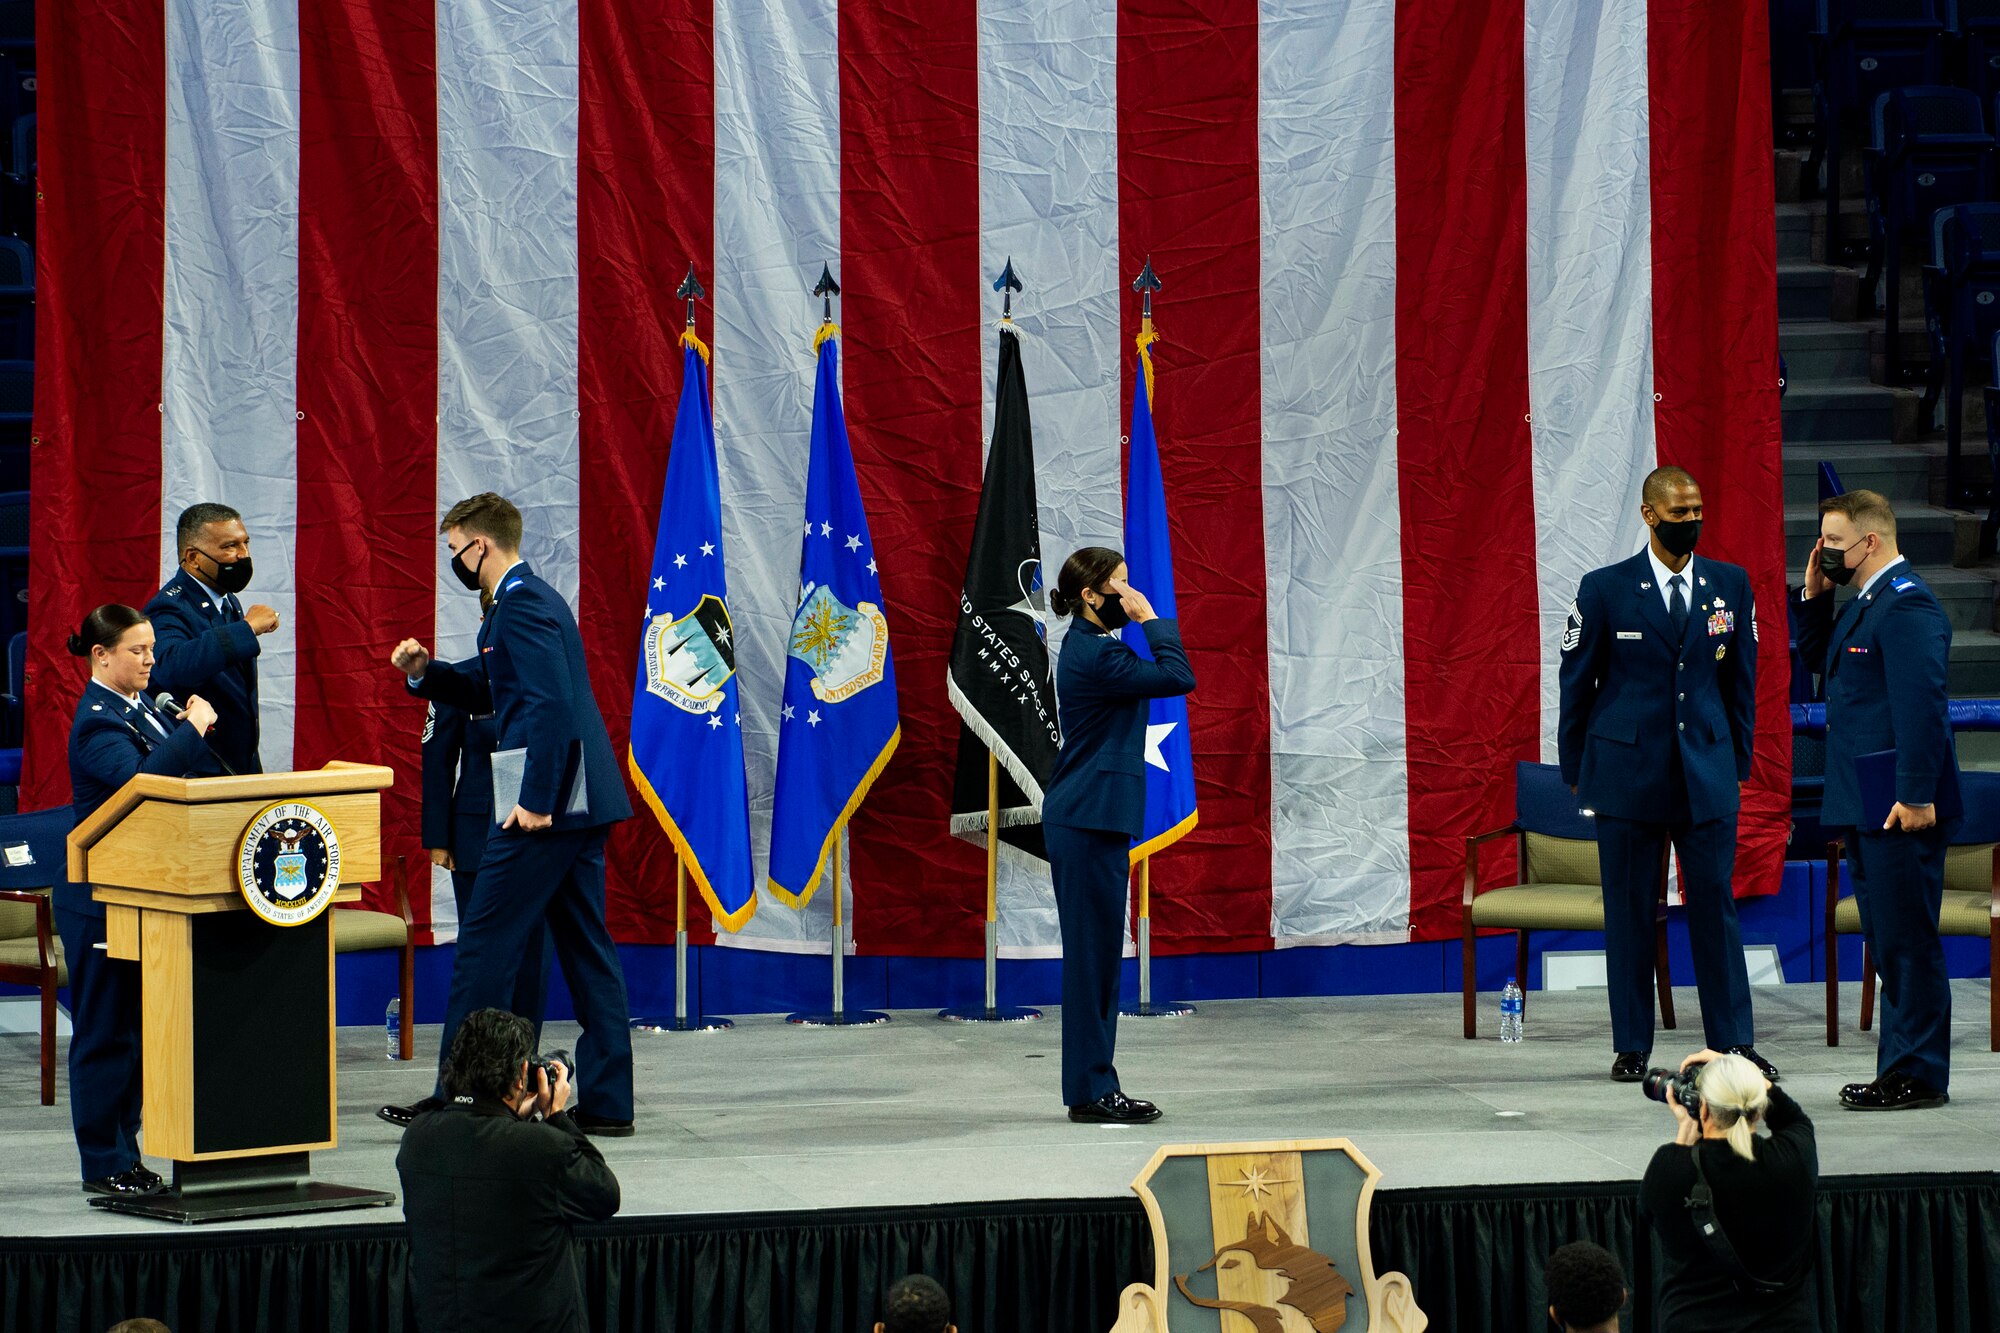 U. S. Air Force Academy Preparatory School cadet candidates cross the stage to be recognized by their leadership during their graduation ceremony May 12, 2021.